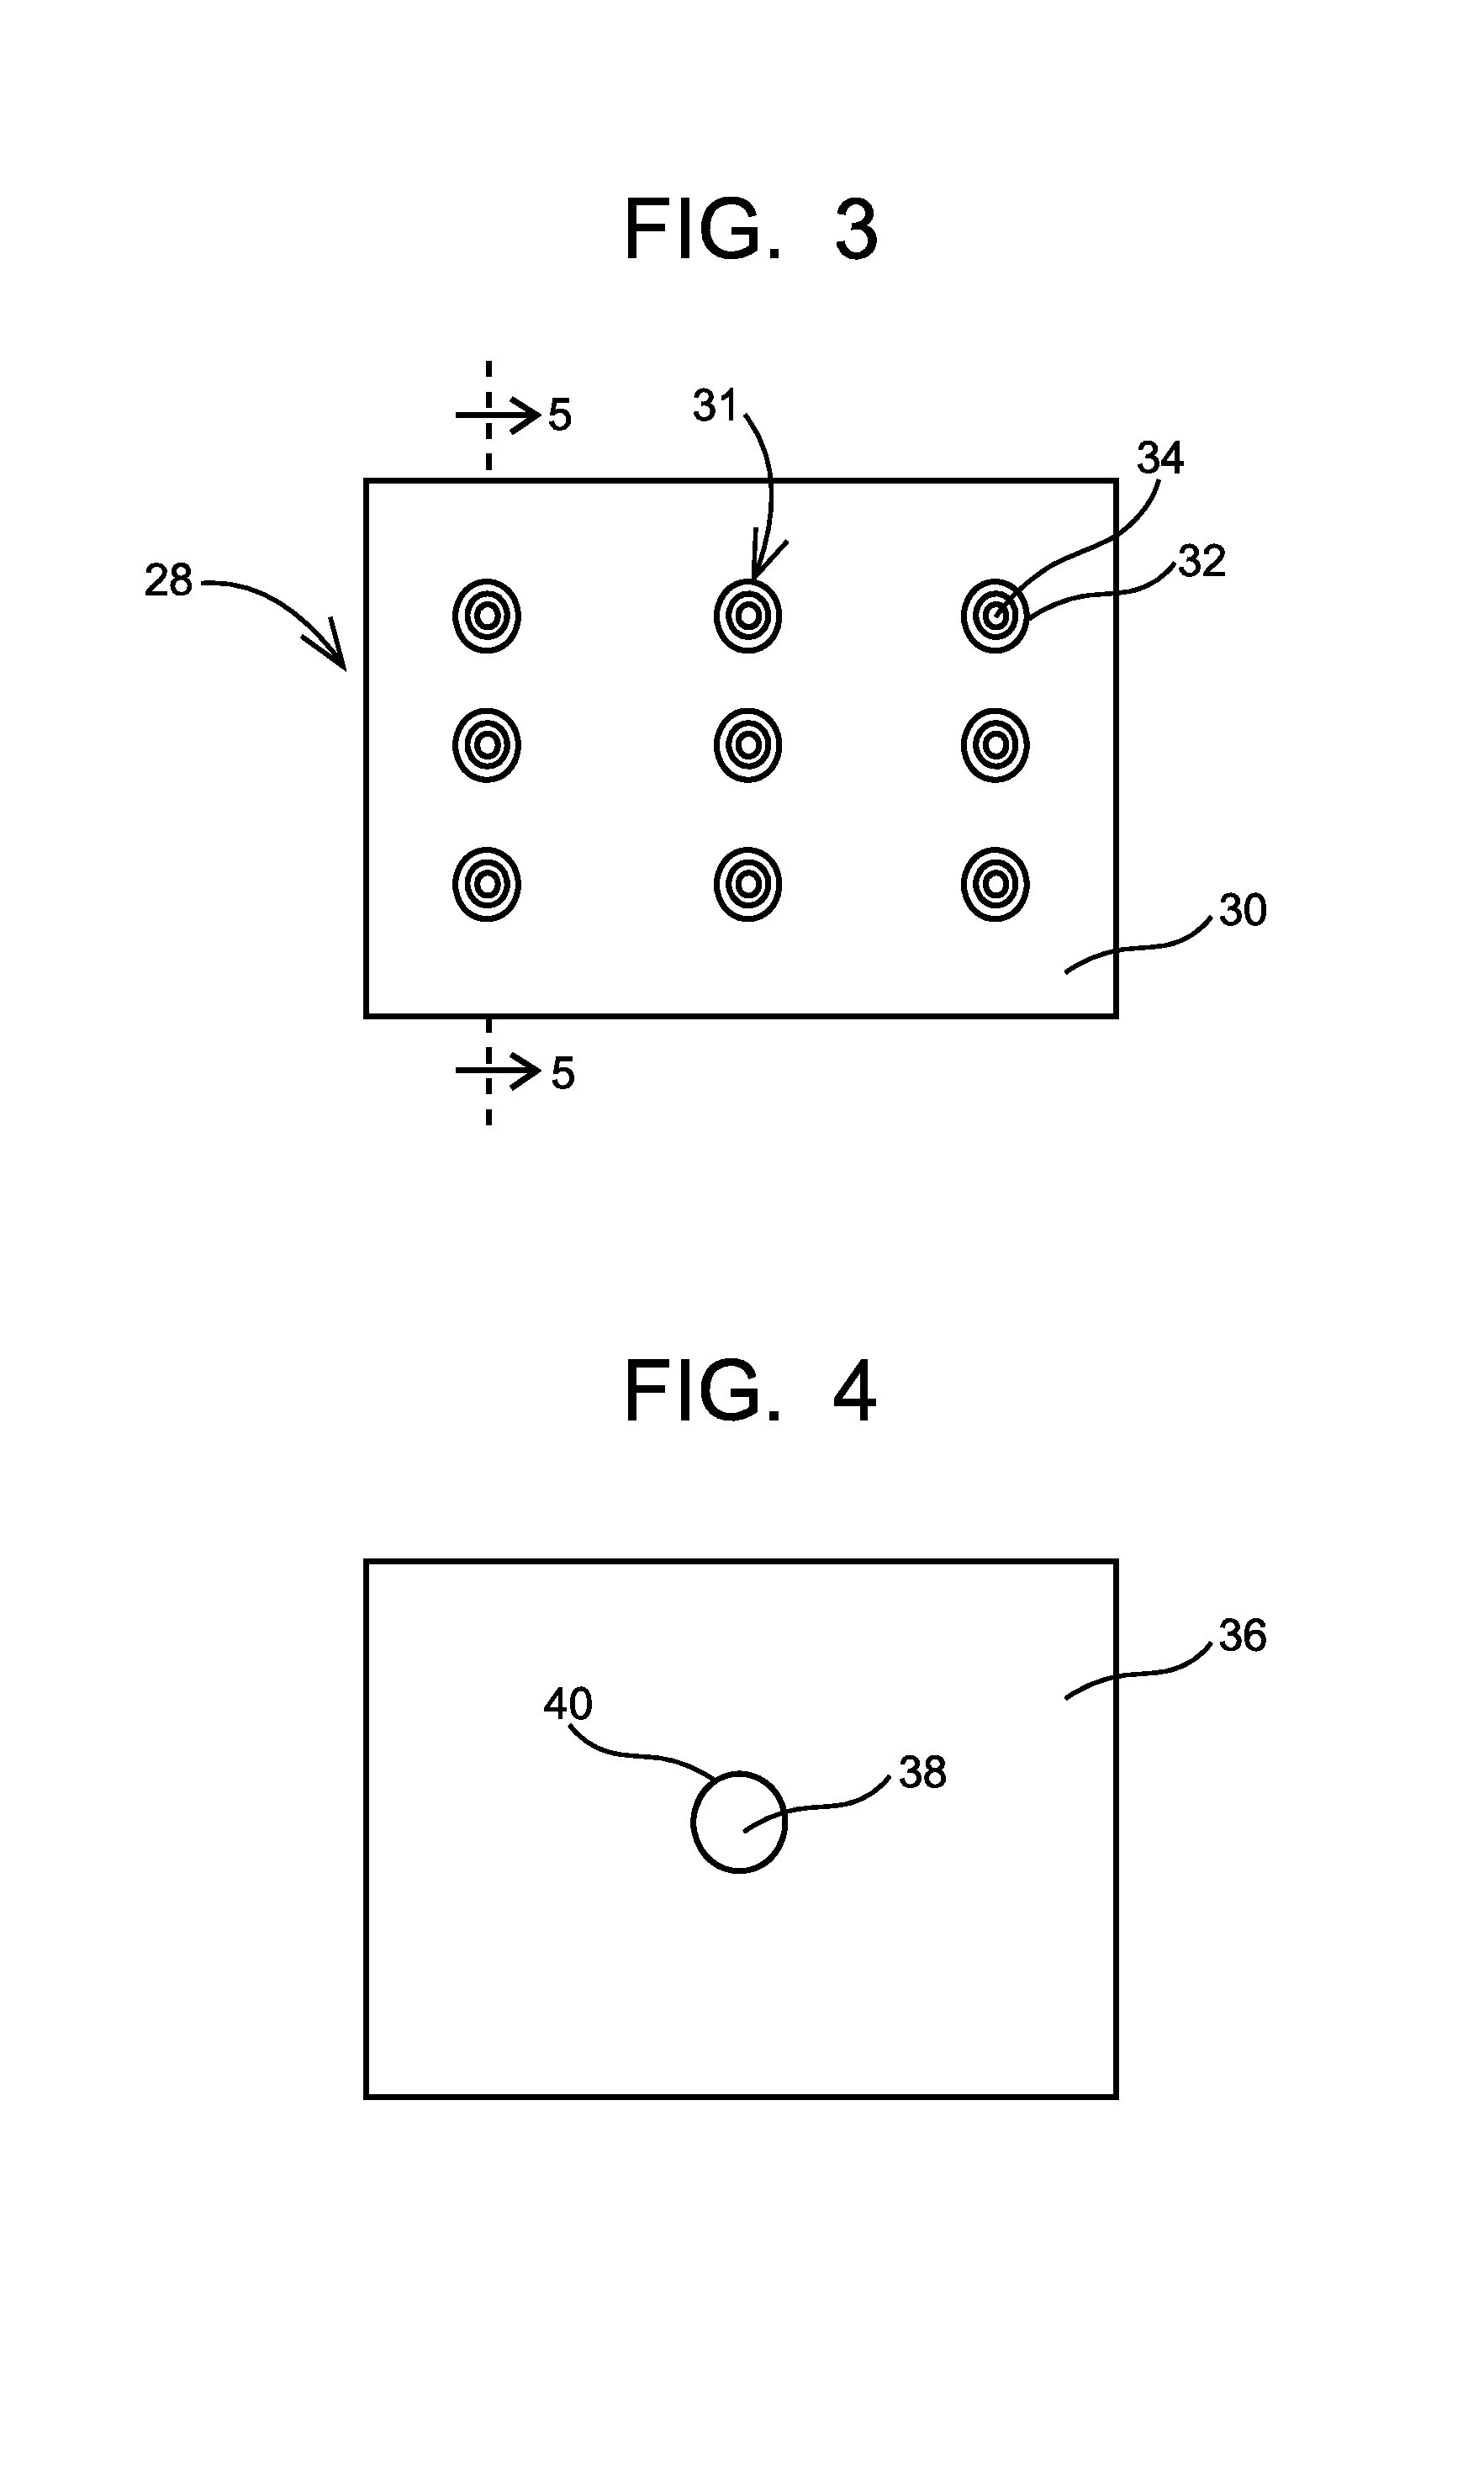 Dual-chamber water jet assembly for in-ground pools or spas